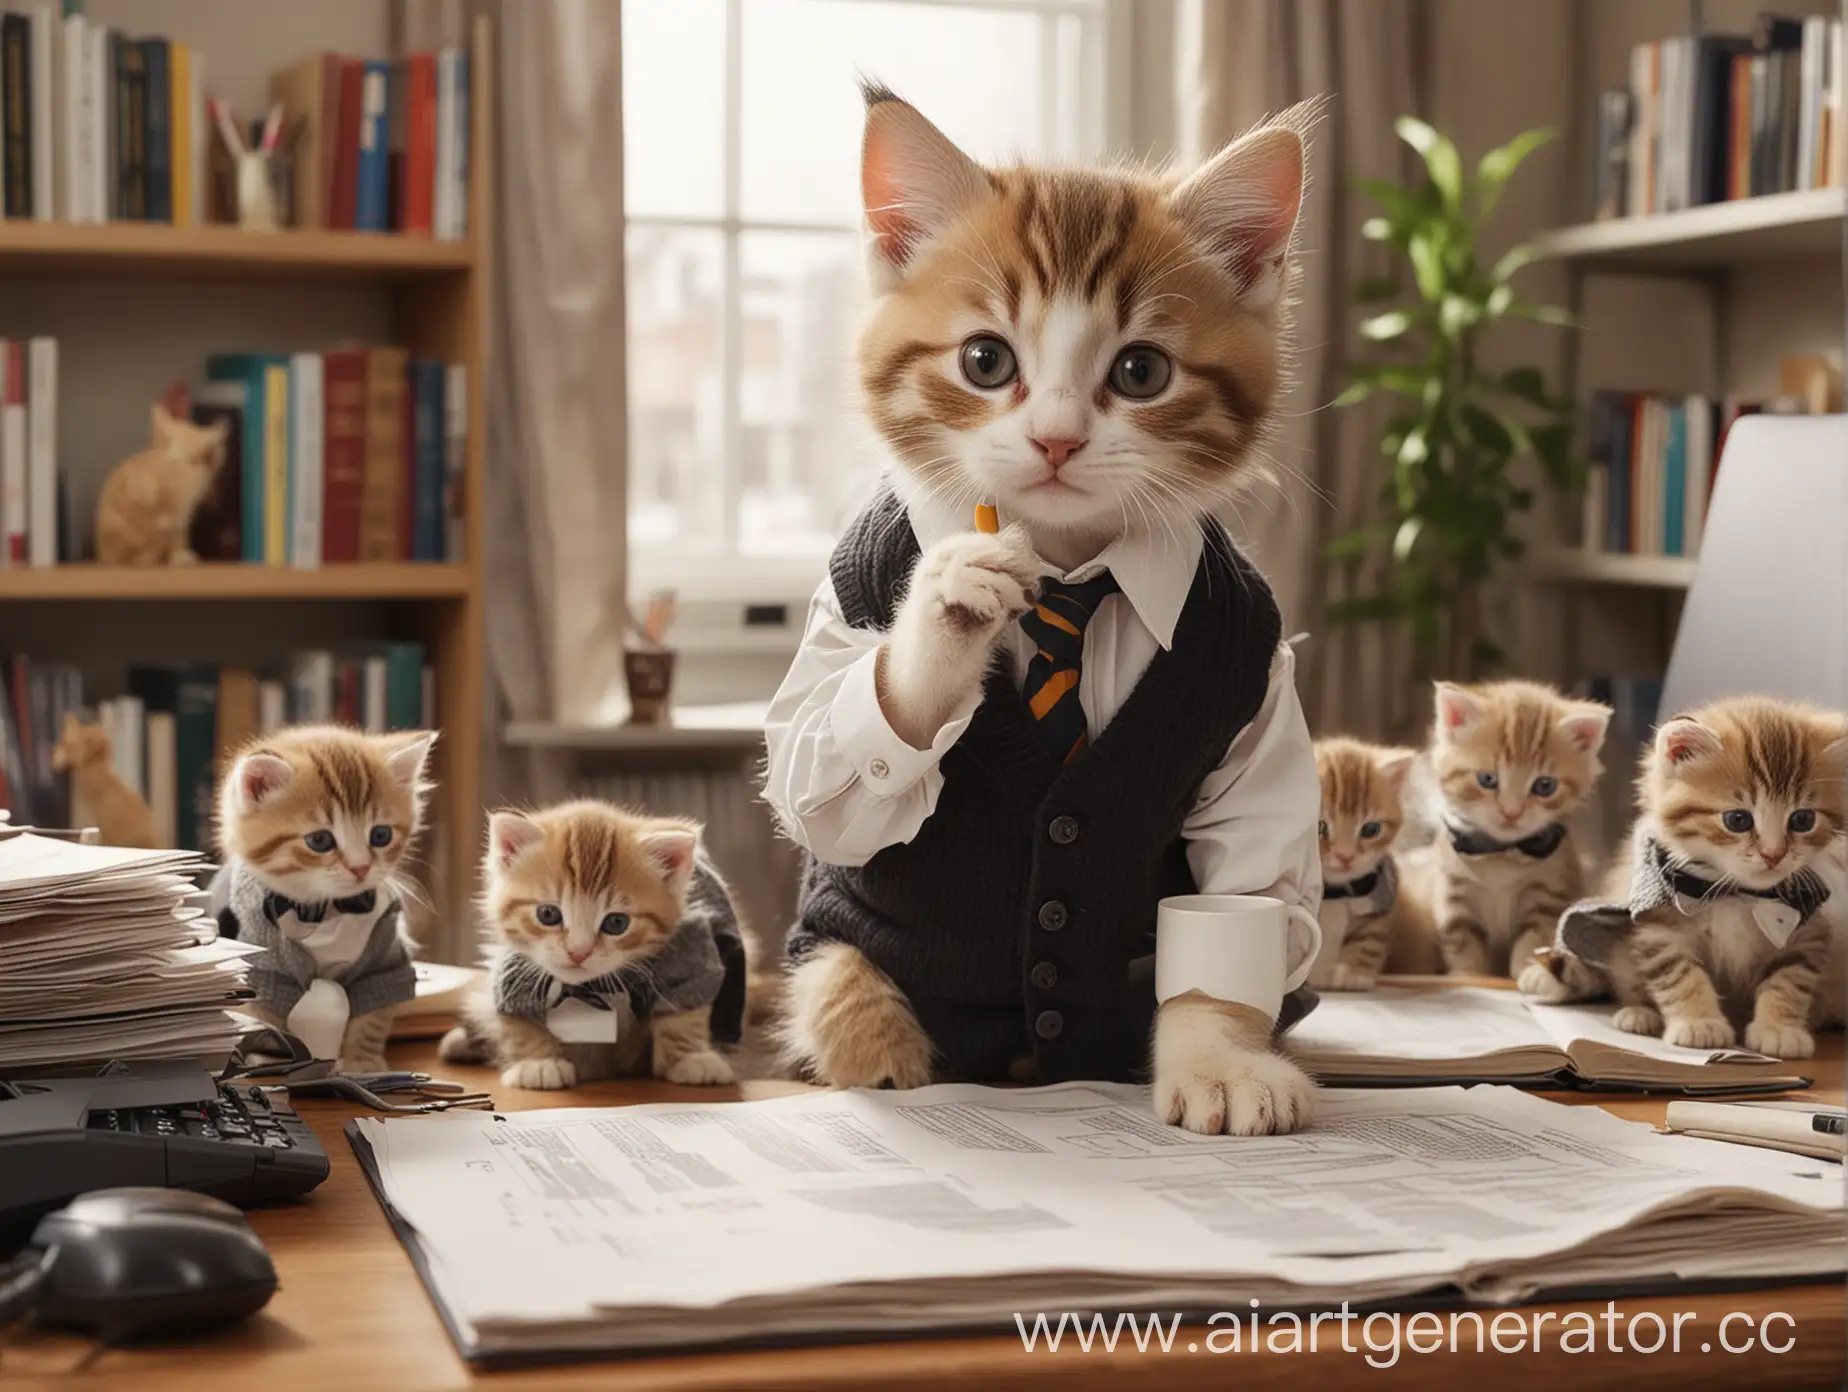 Six-Kittens-Business-Meeting-Feline-Professionals-in-Office